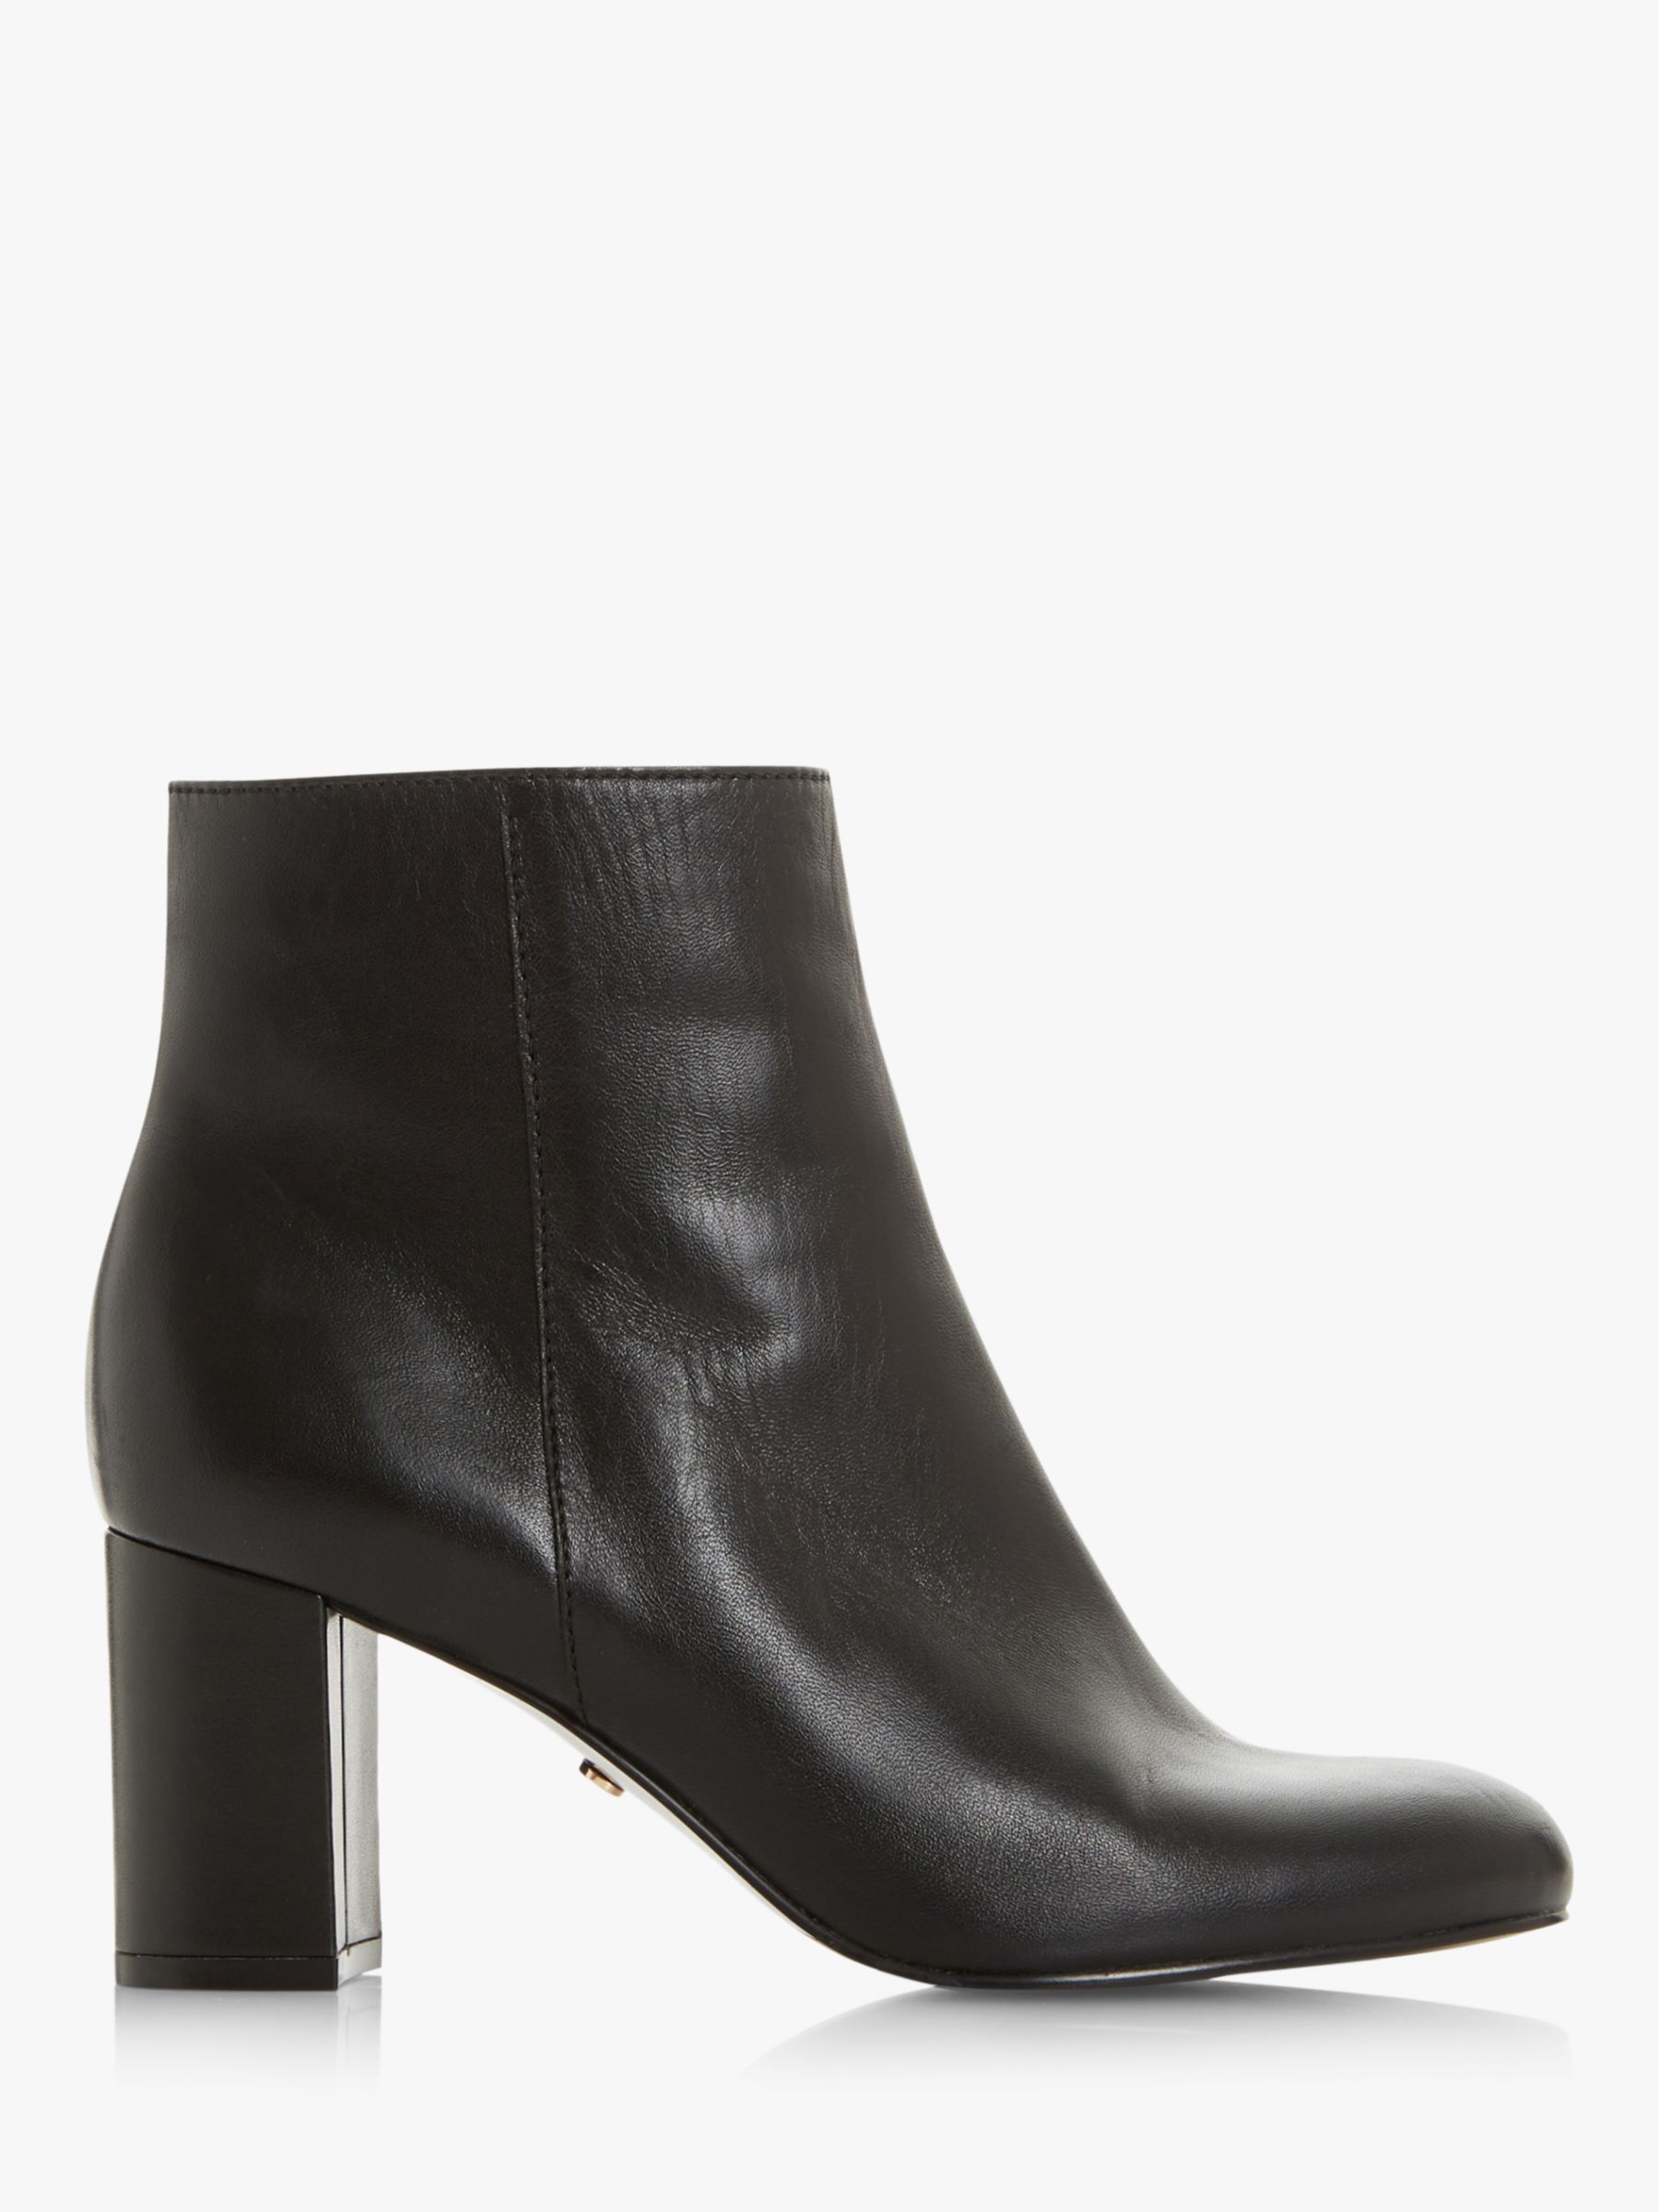 Dune Ovel T Leather Block Heel Ankle Boots, Black